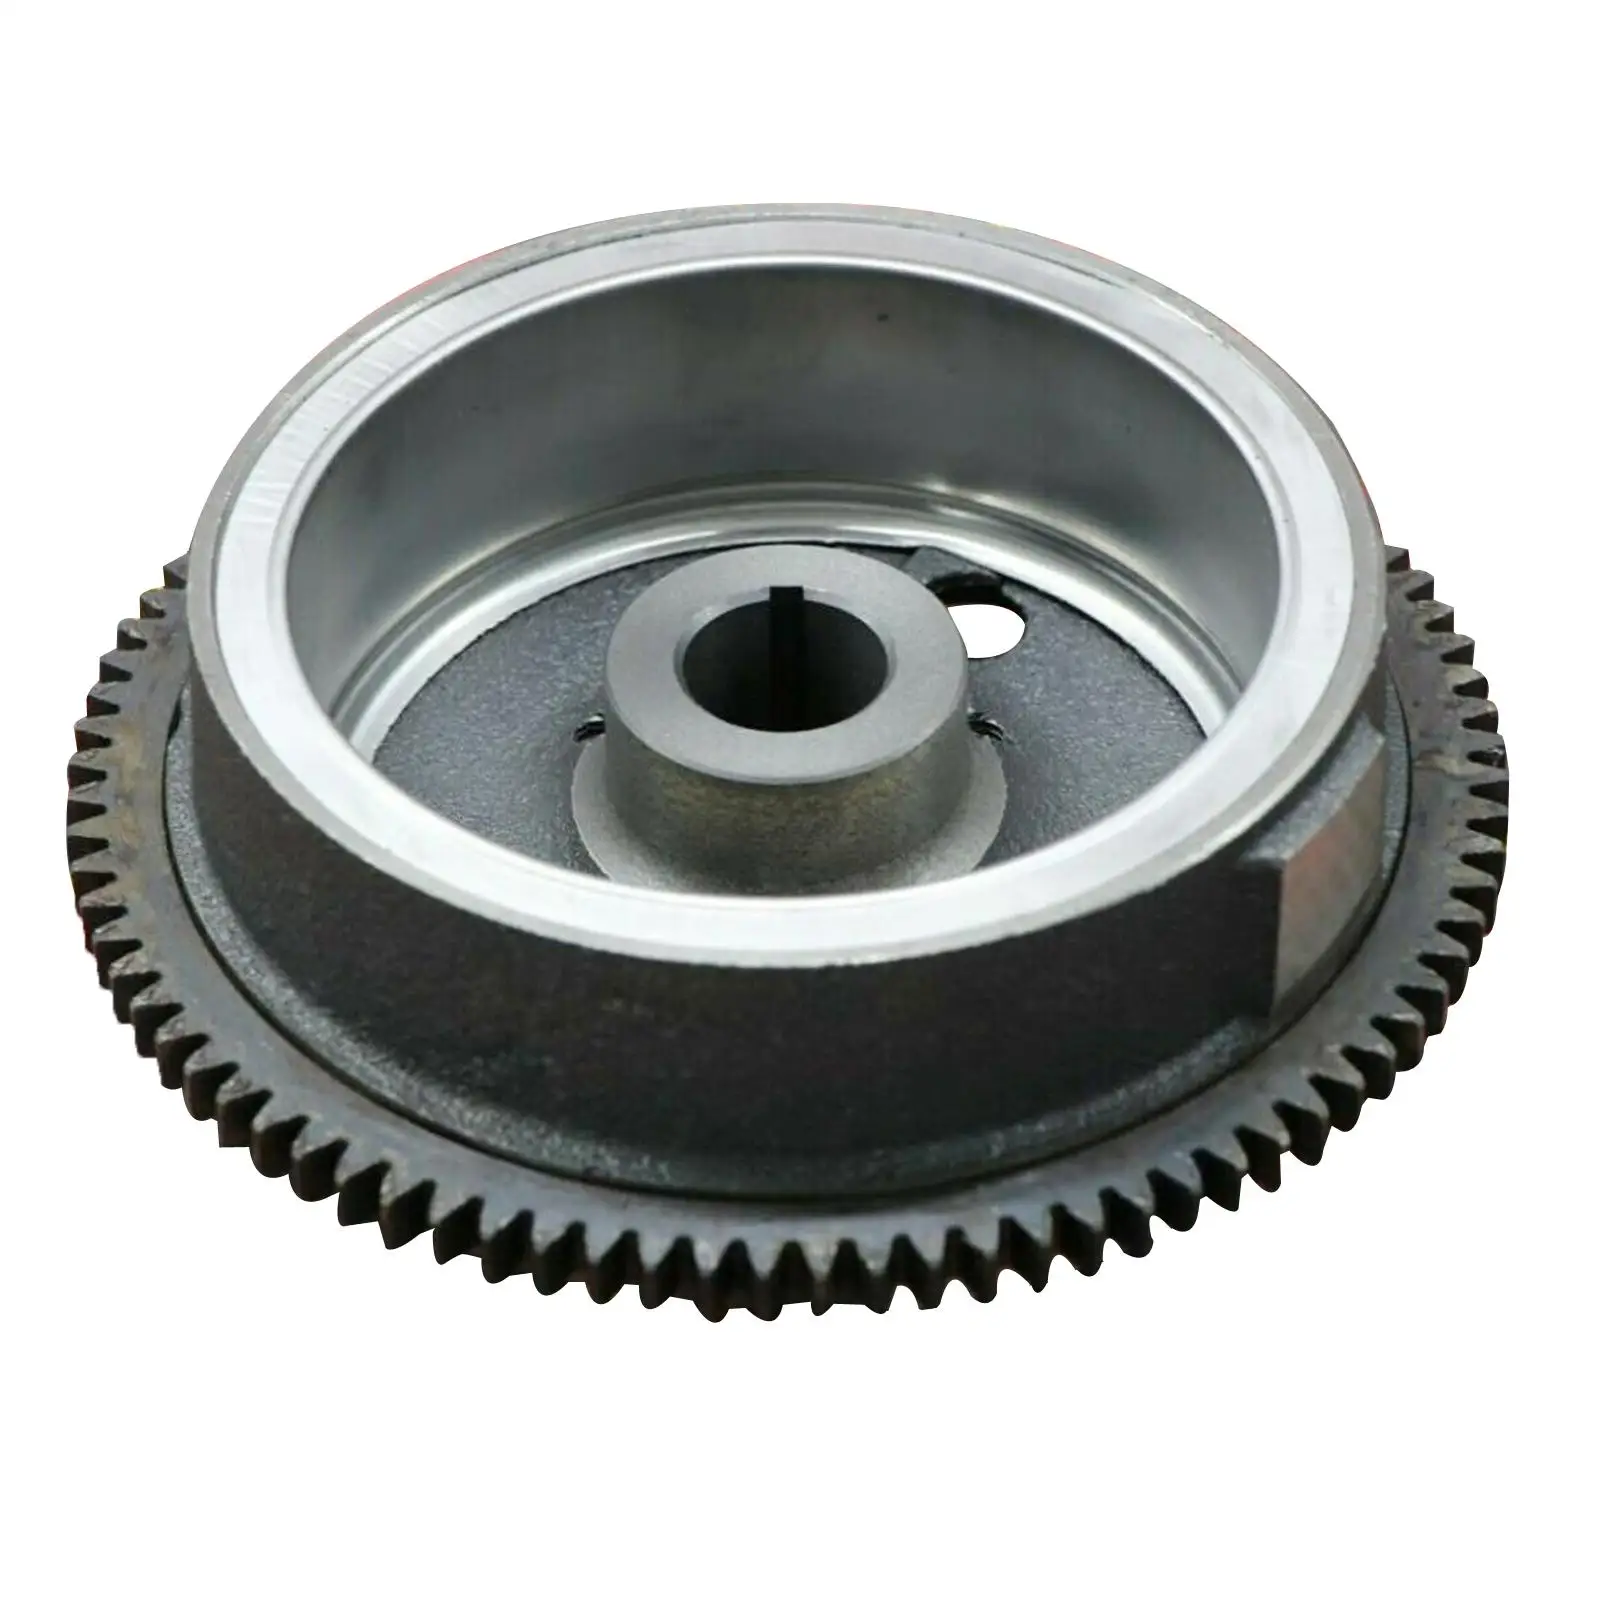 

Fly Wheel Motors Engines Supplies Flywheel Replacement Fits for